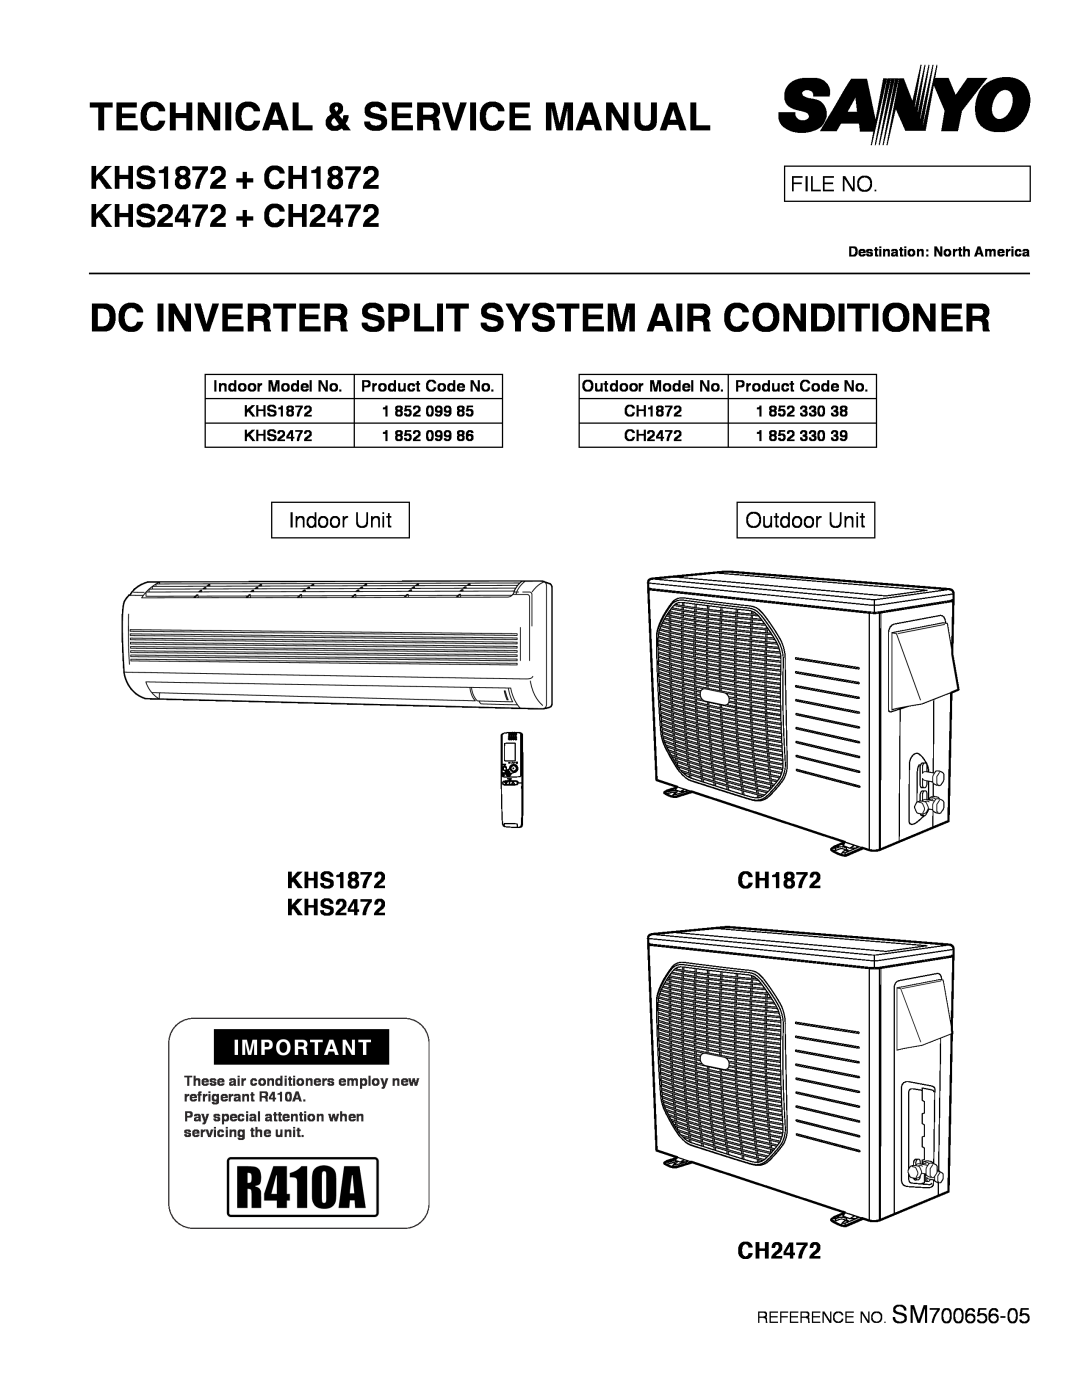 Sanyo service manual KHS1872 + CH1872 KHS2472 + CH2472, Dc Inverter Split System Air Conditioner, File No, Indoor Unit 